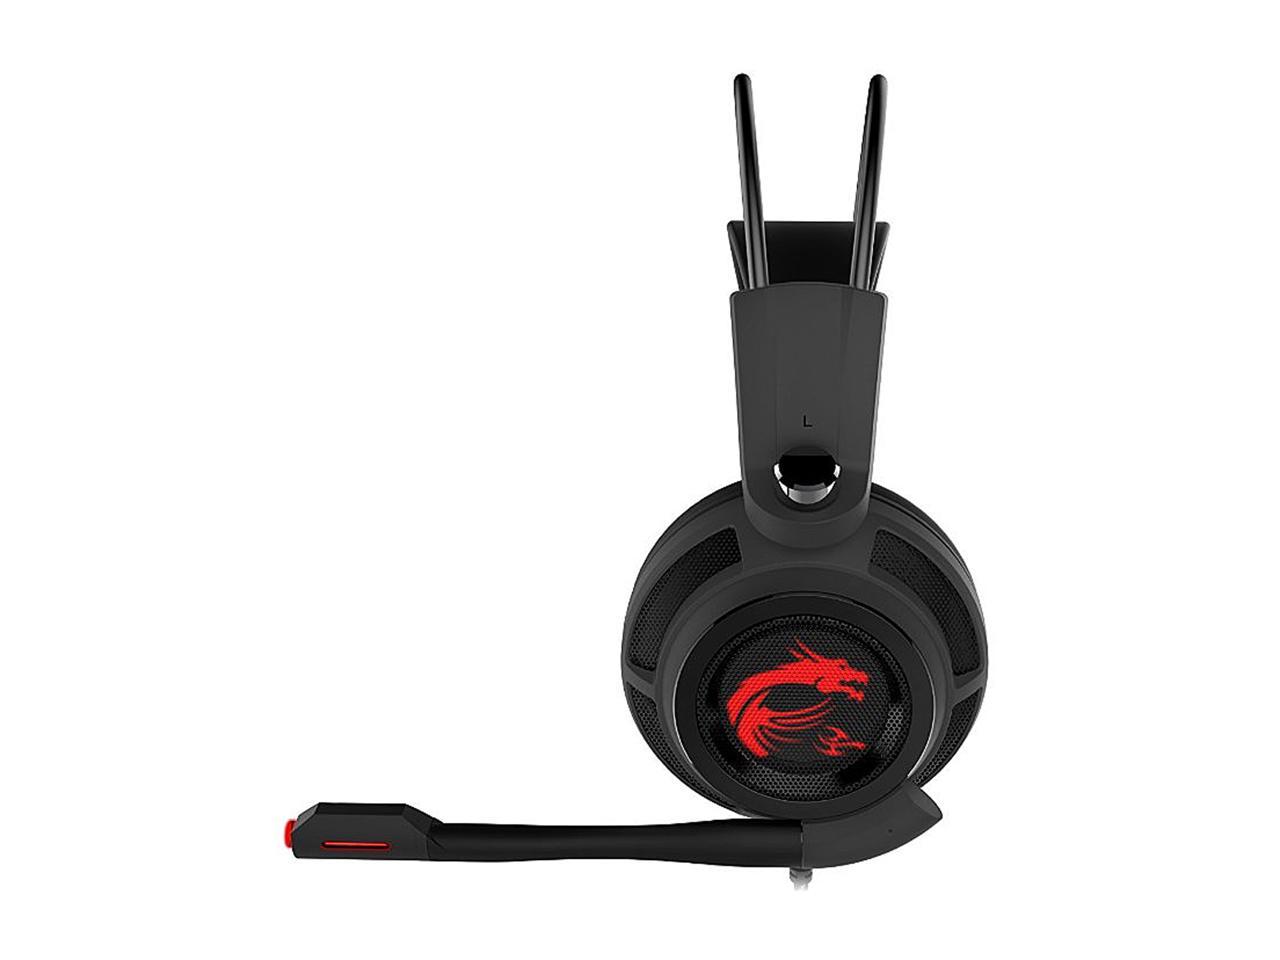 DS 502 Intelligent Vibration System Enhanced Virtual 7.1 Surround Sound MSI Gaming Headset with Microphone 